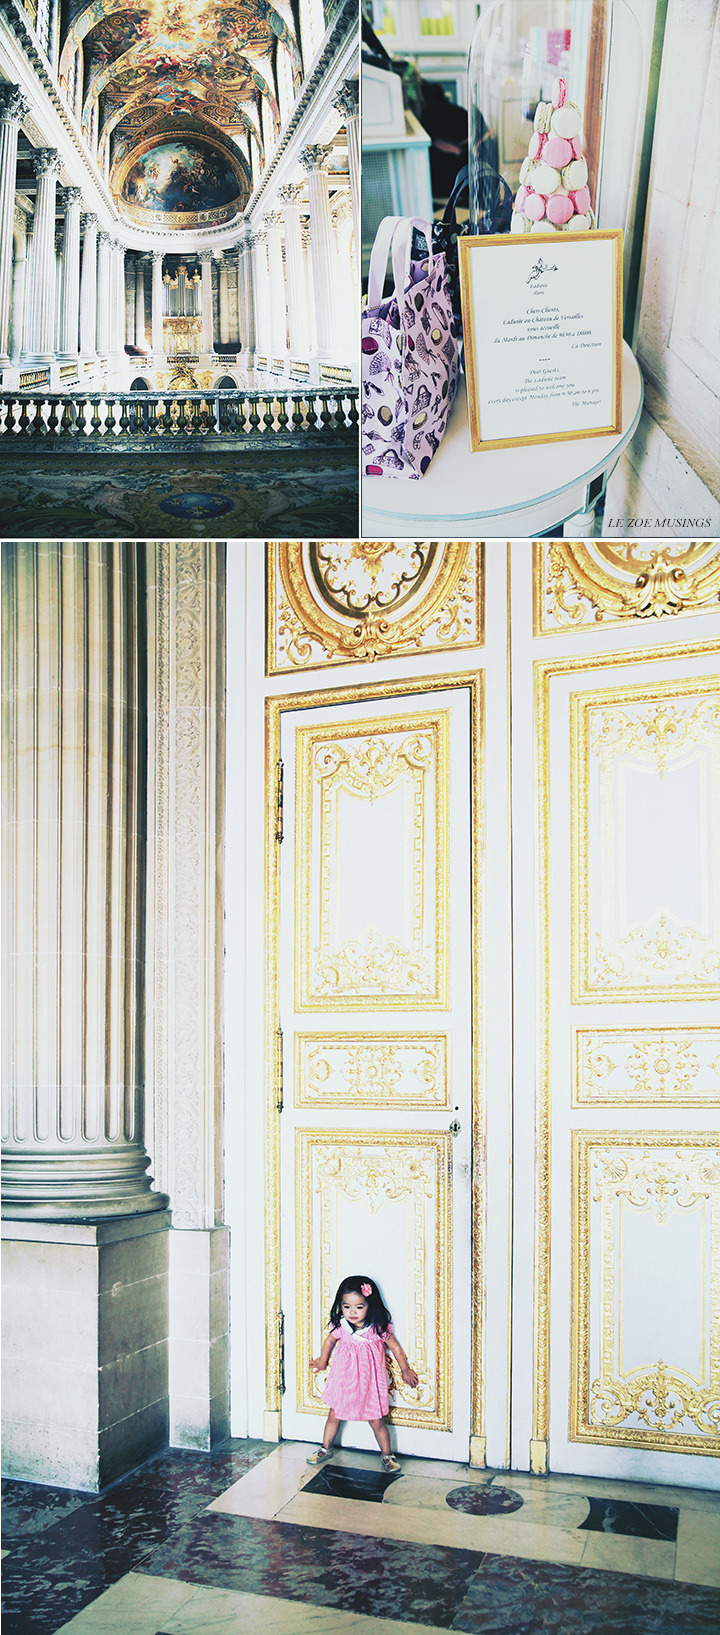 Palace of Versailles by Le Zoe Musings2